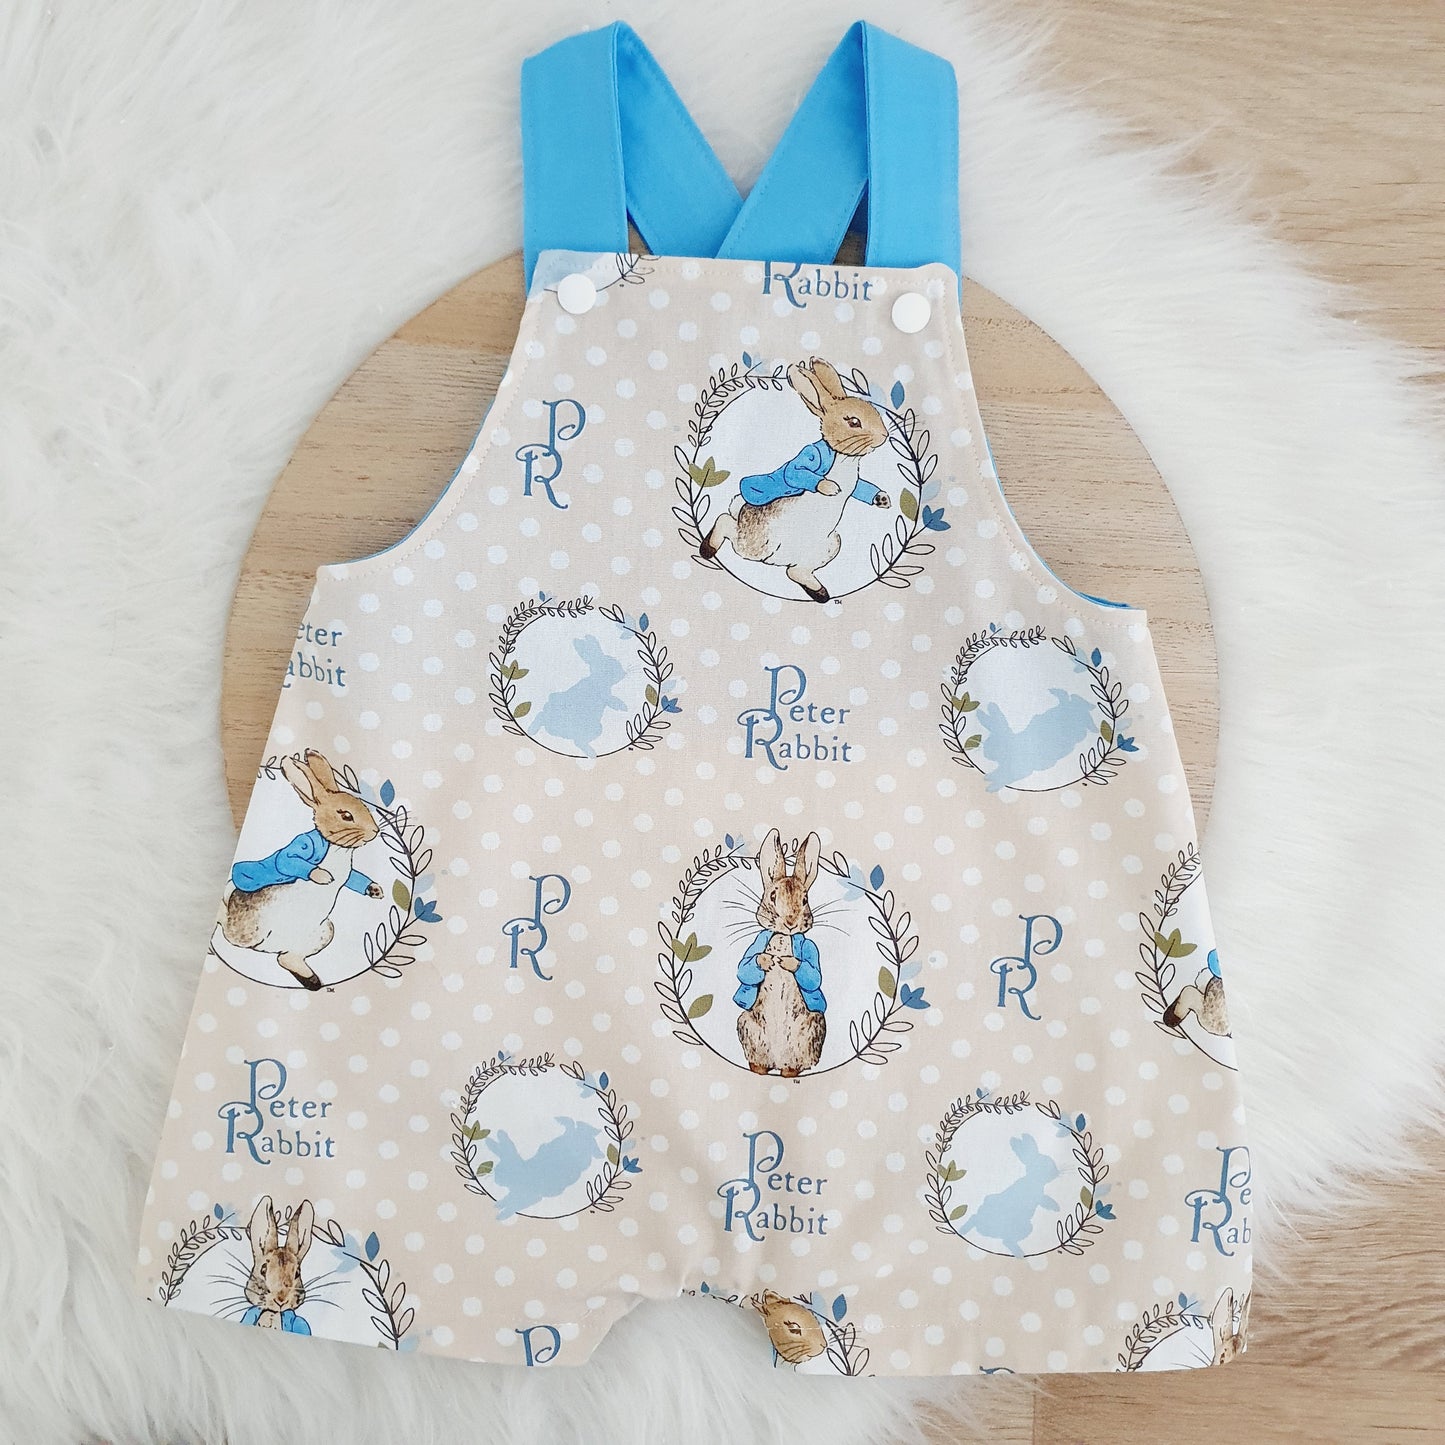 PETER RABBIT print Overalls, Baby Overalls, Short Leg Romper / 1st Birthday / Cake Smash Outfit, Size 1